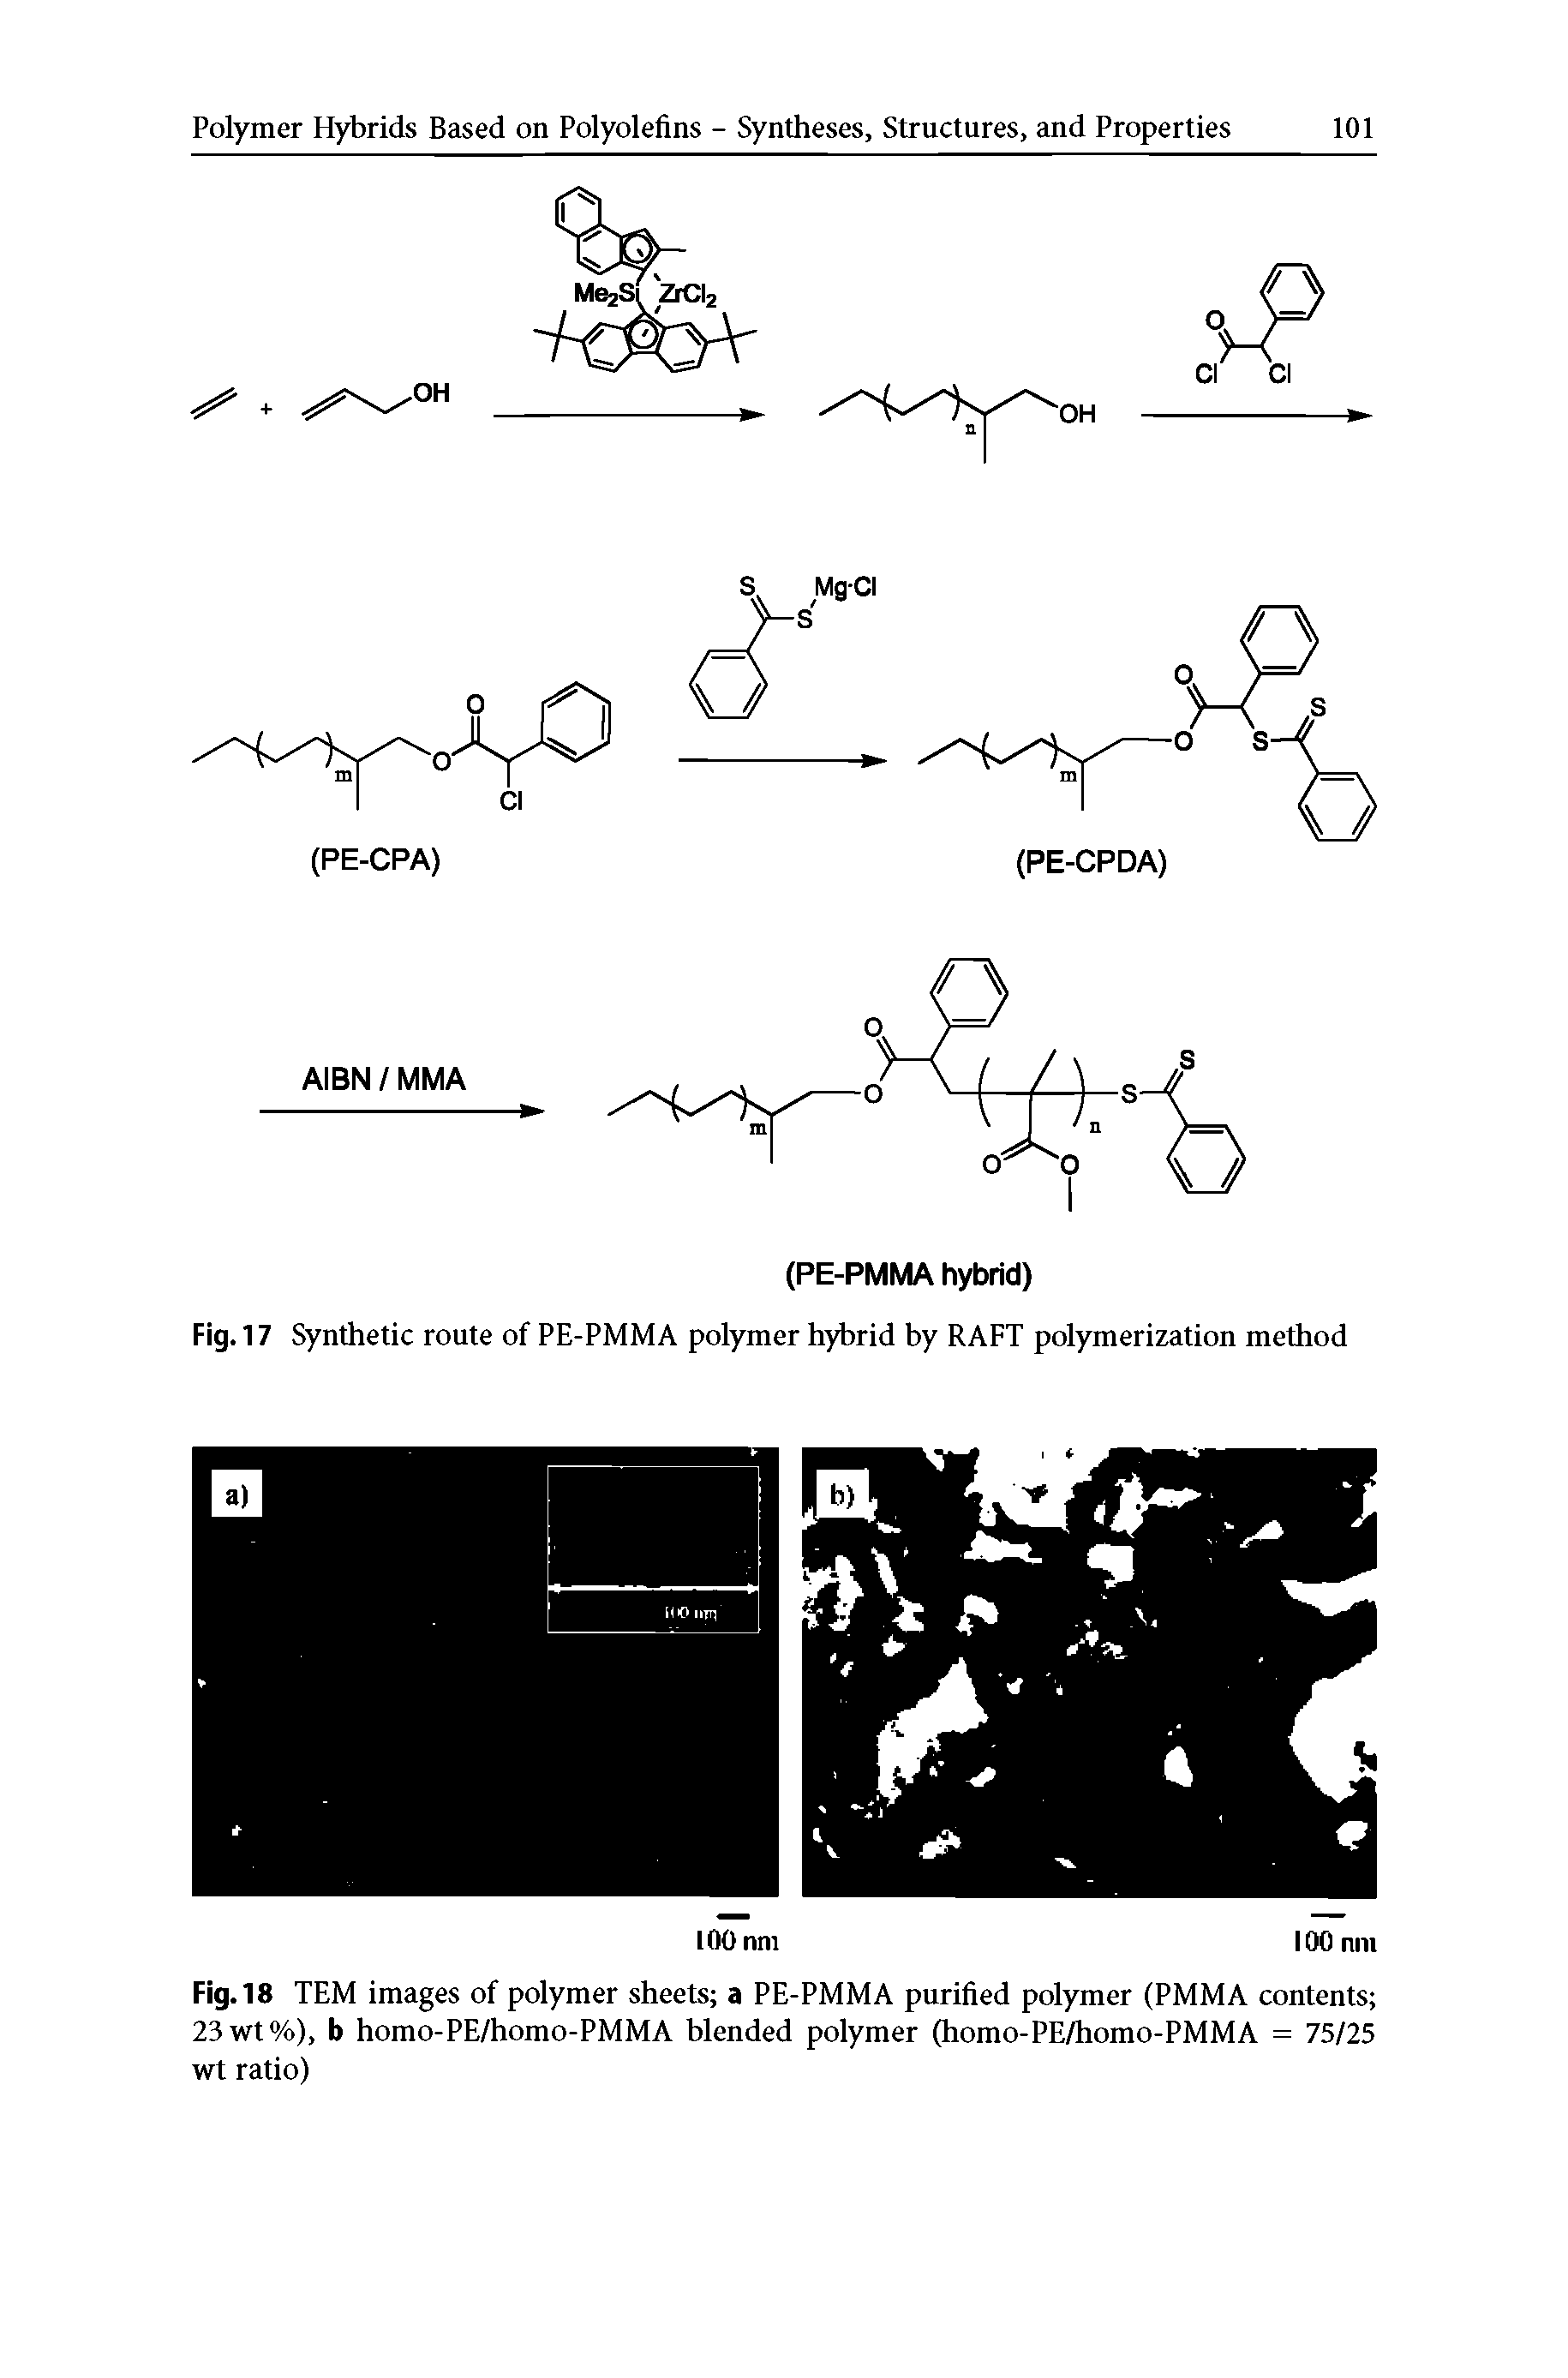 Fig. 18 TEM images of polymer sheets a PE-PMMA purified polymer (PMMA contents 23wt%), b homo-PE/homo-PMMA blended polymer (homo-PE/homo-PMMA = 75/25 wt ratio)...